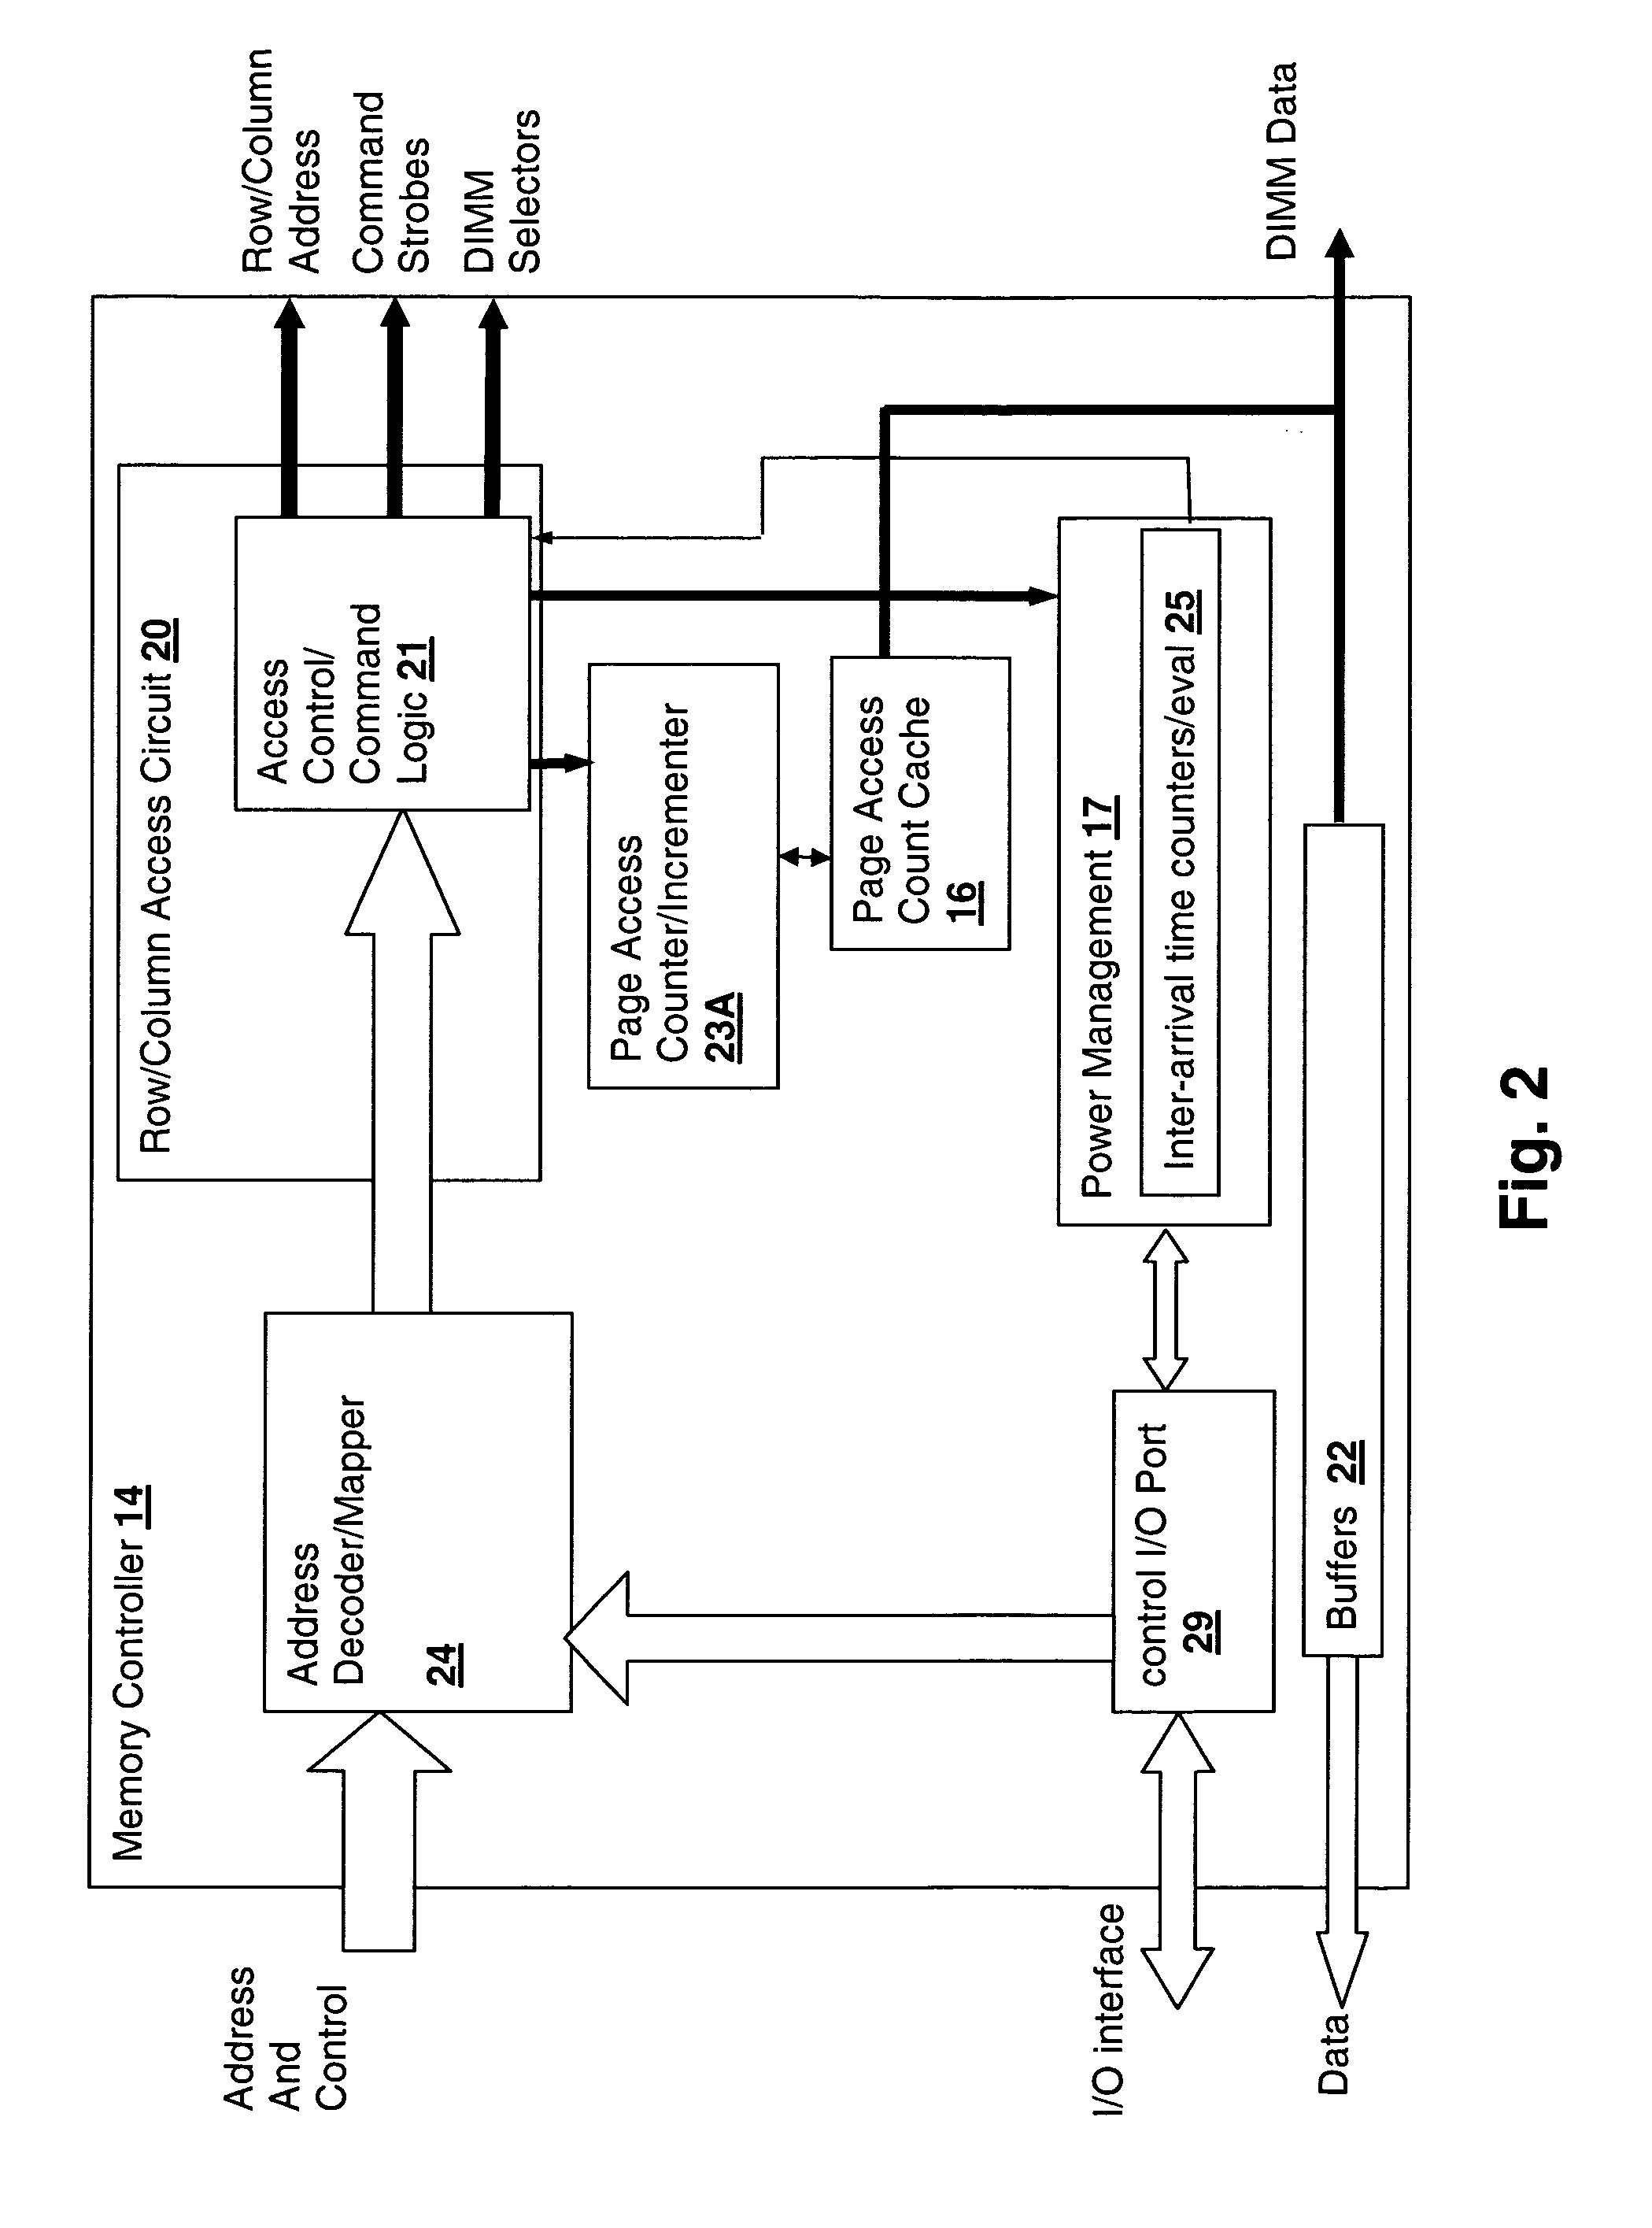 Method and system for decreasing power consumption in memory arrays having usage-driven power management